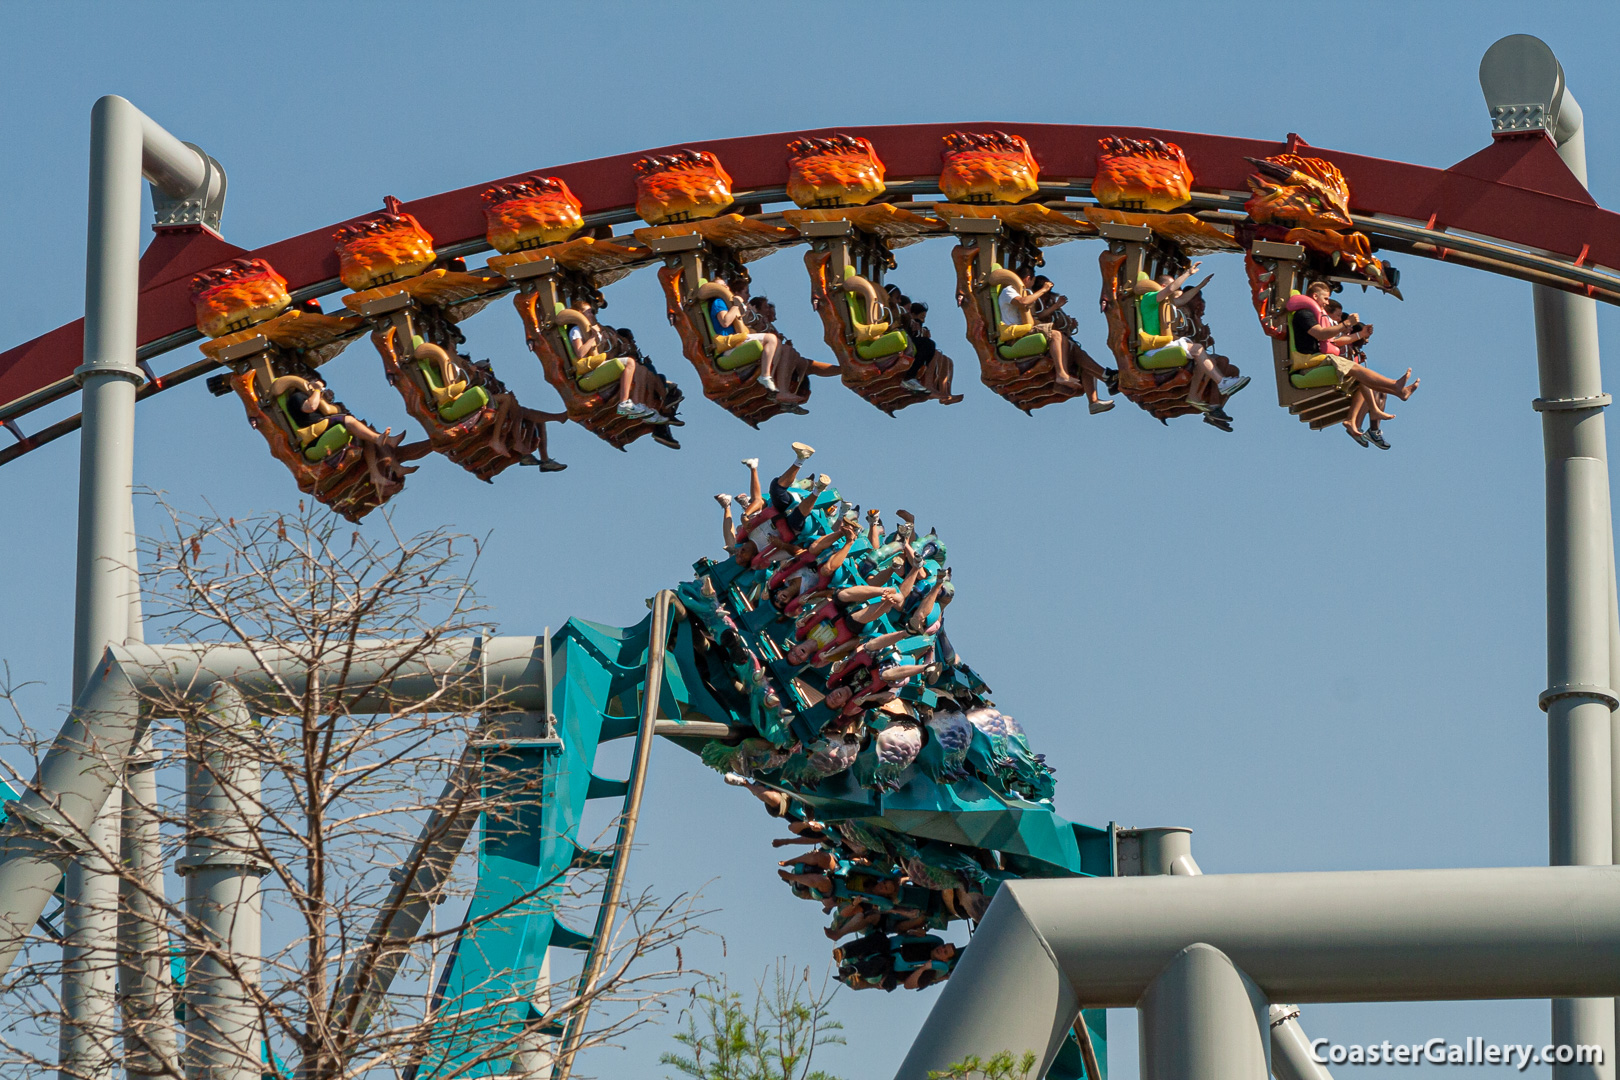 A near-miss on Dueling Dragons at Universal Studios Florida